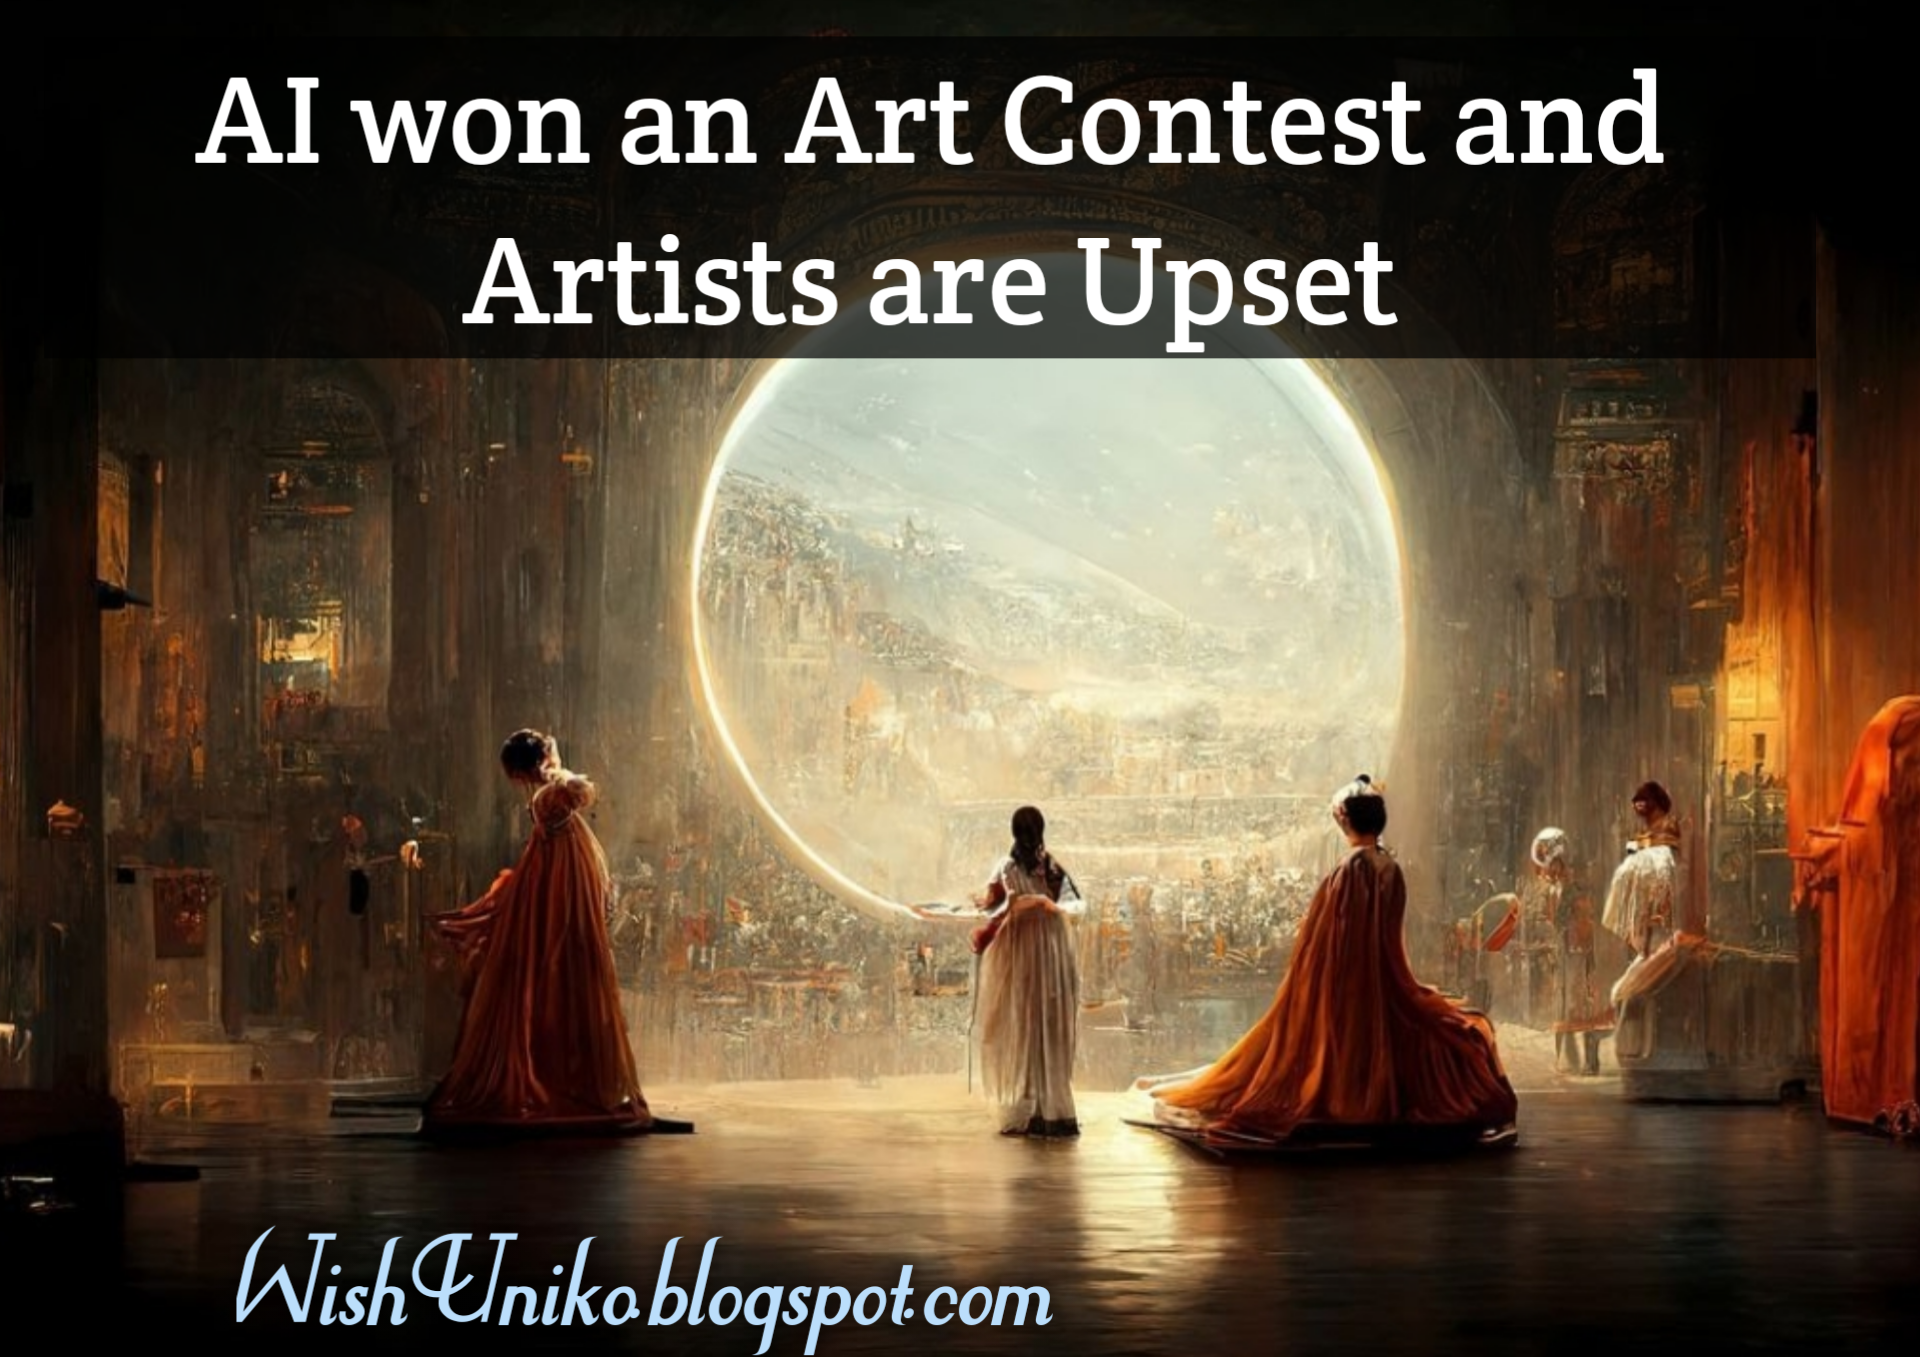 AI won an Art Contest and Artists are Upset